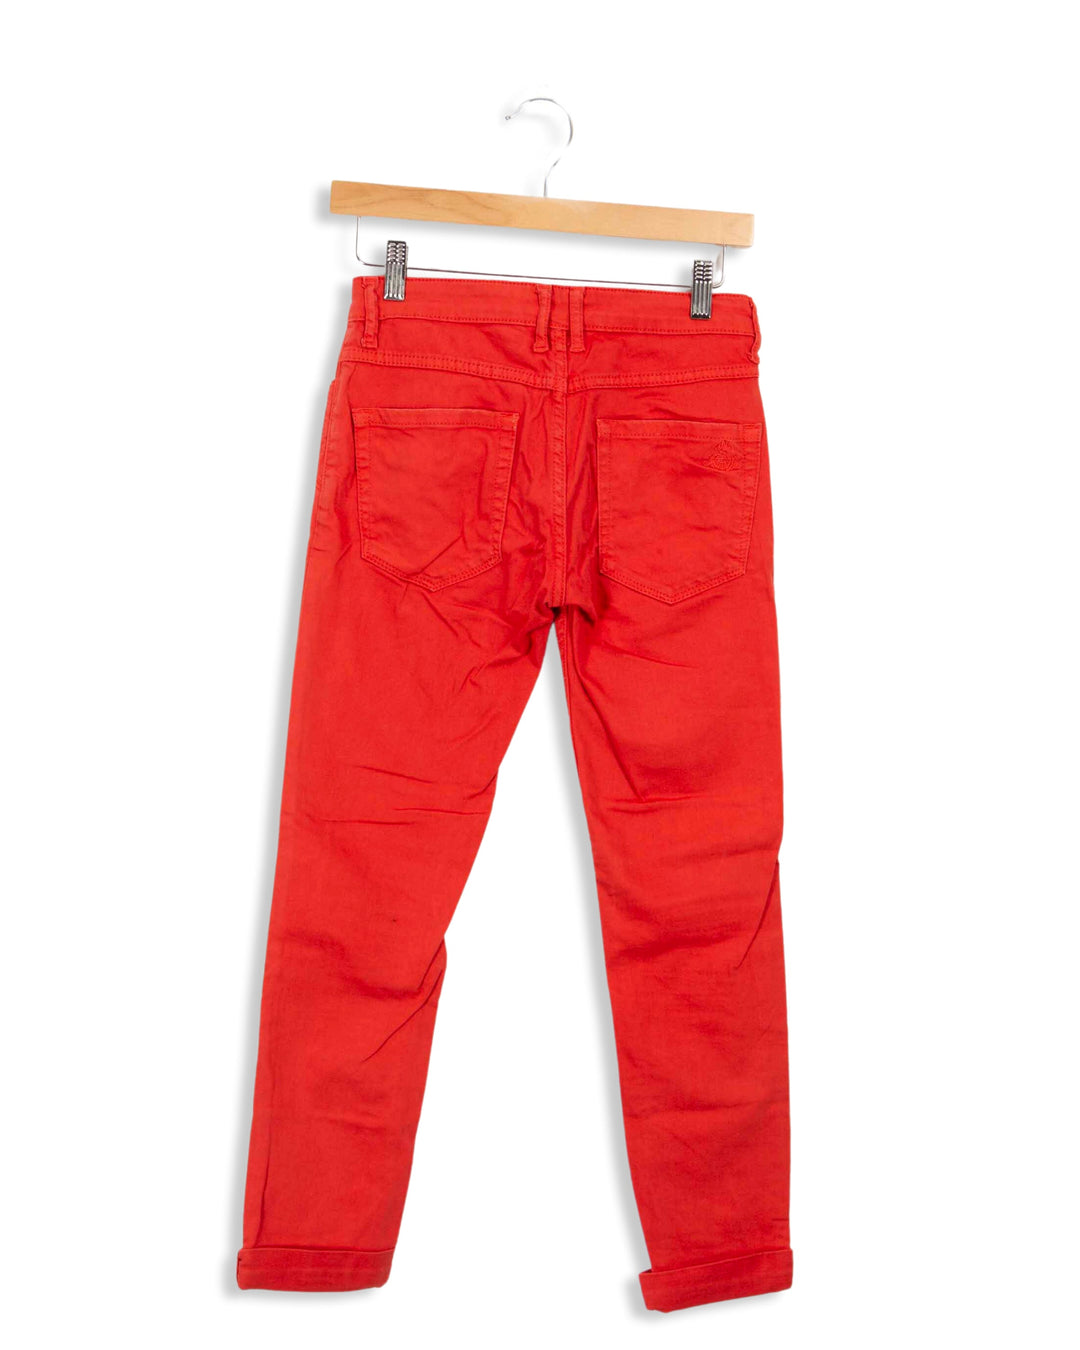 Sandro red jeans - 34